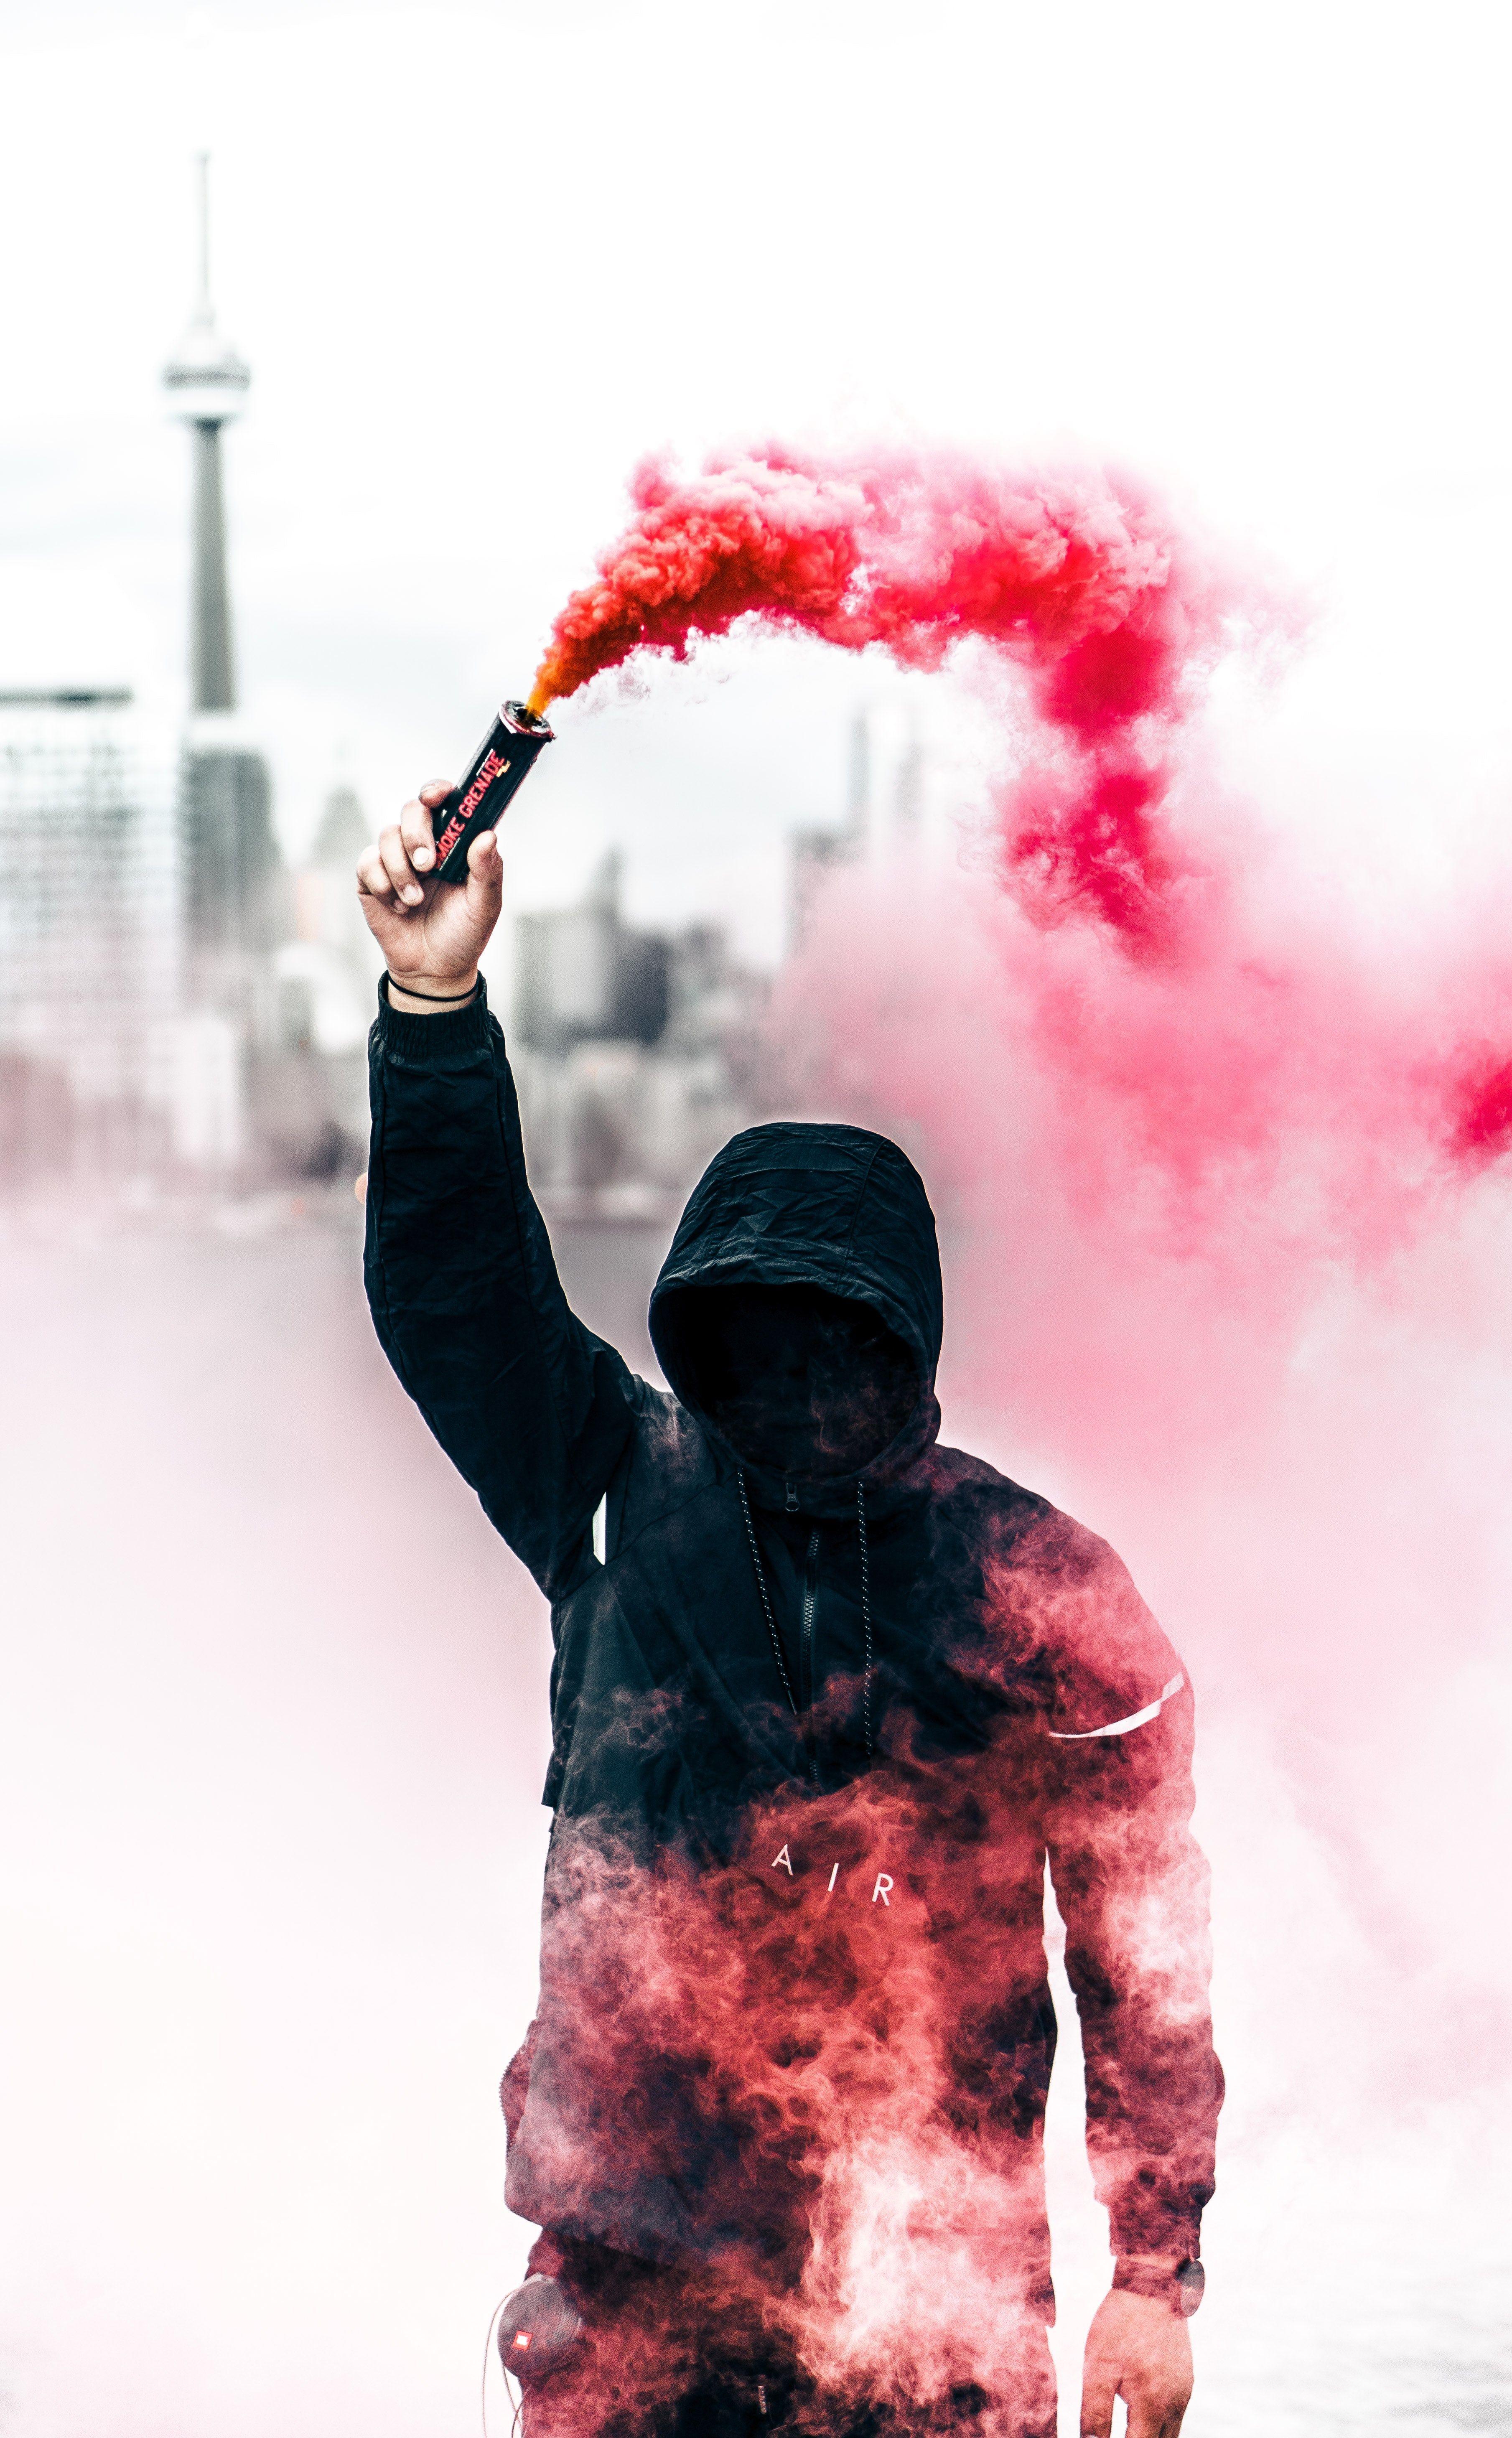 A person in a black hoodie with obscured face holds up a pink smoke